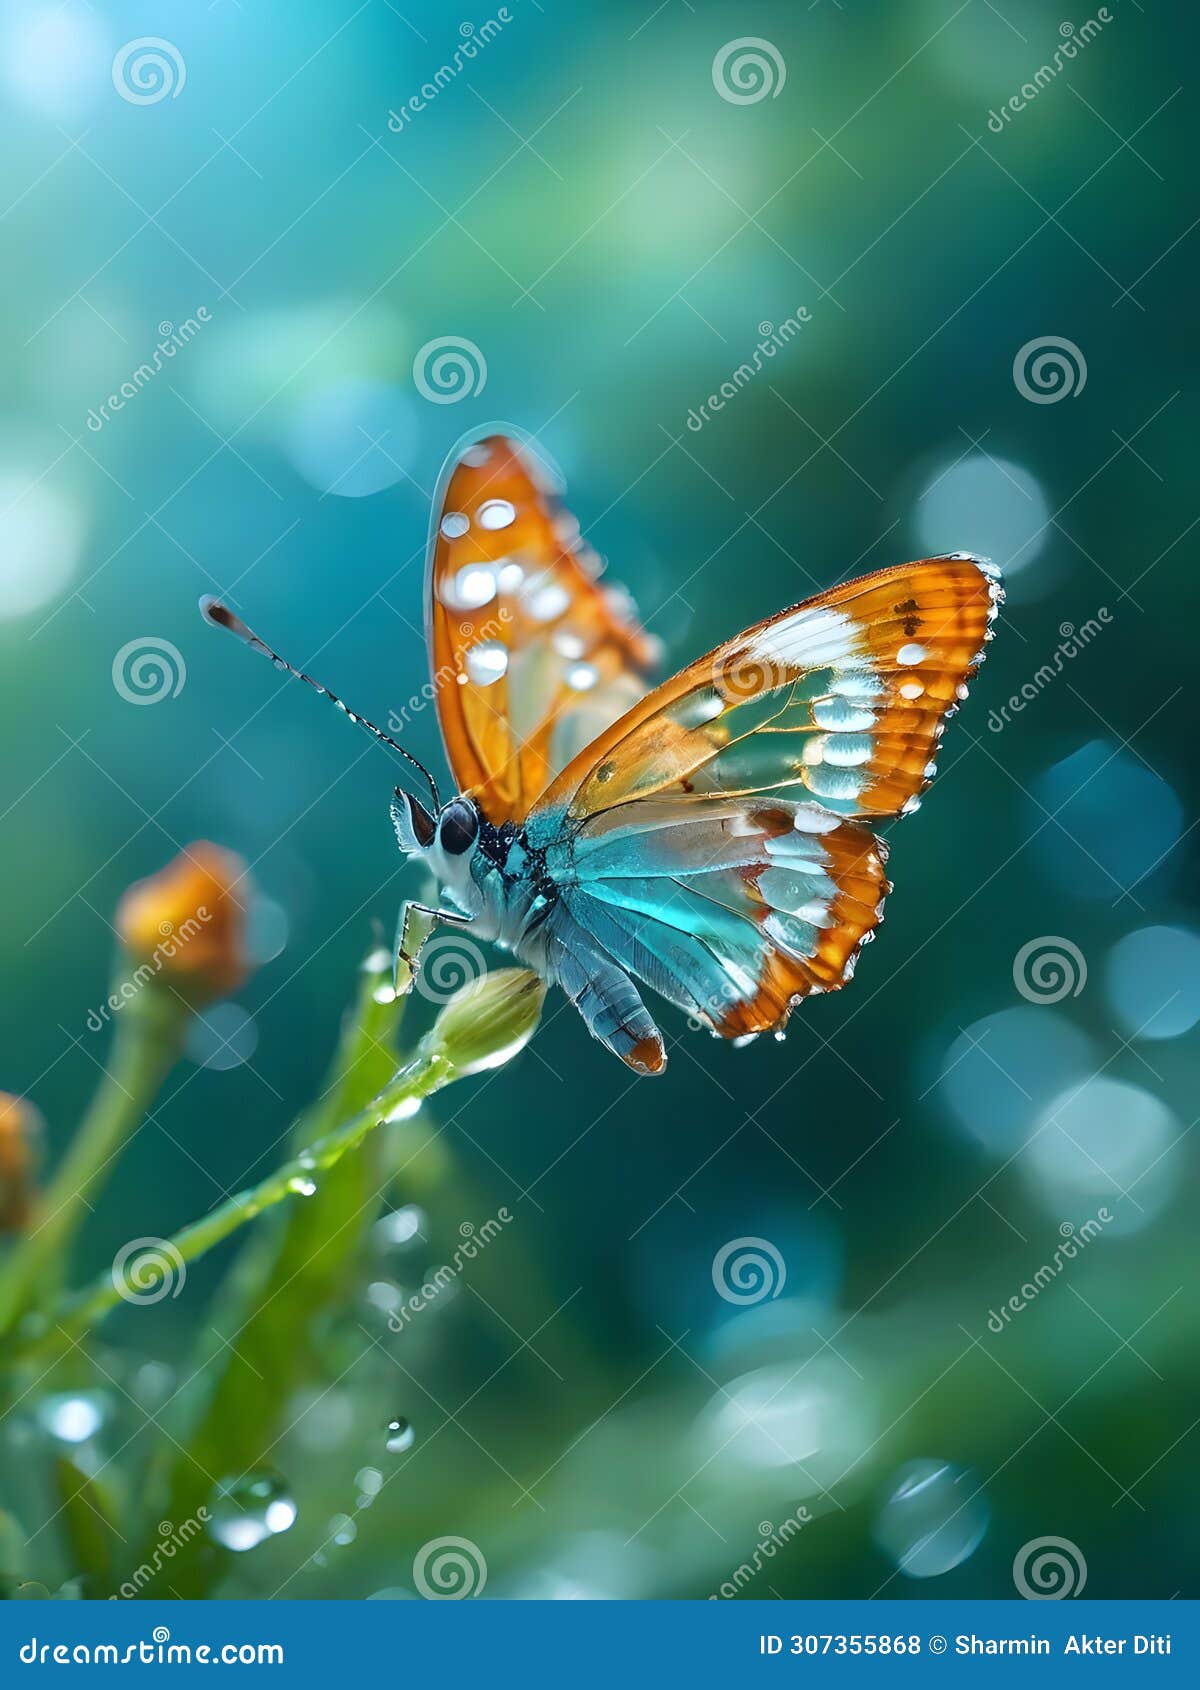 macro photography, miki asai style: translucent baby butterfly, translucent, turquoise color.